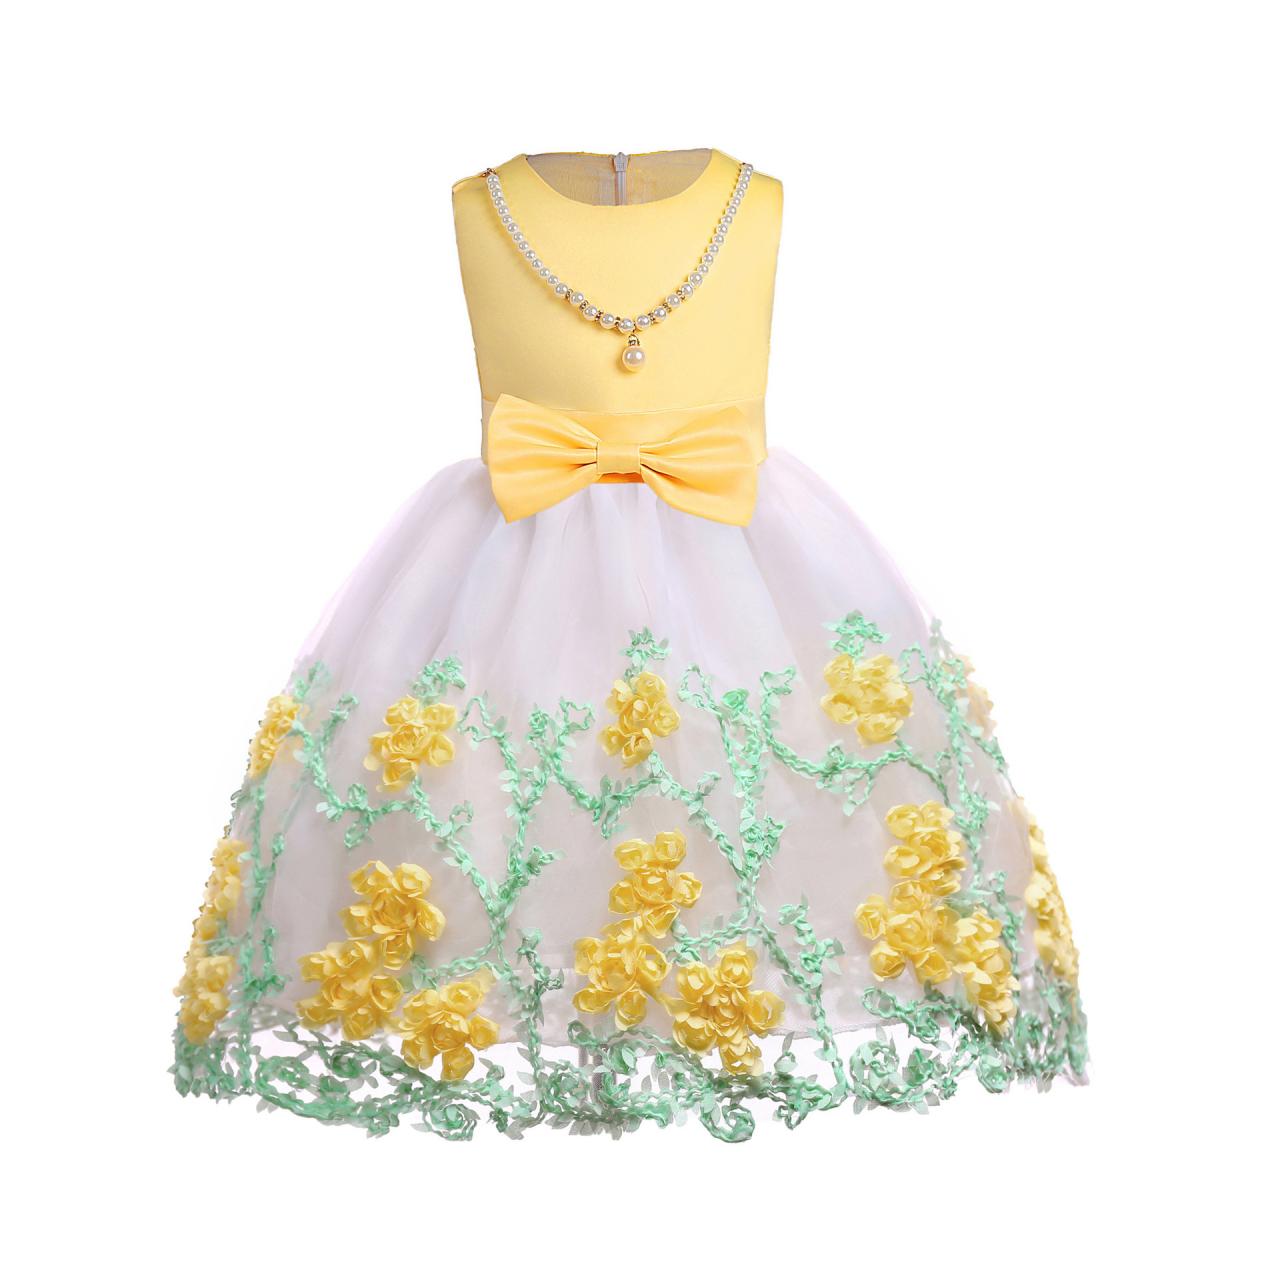 Fashion Yellow Tea Length Floral Flower Girl Dresses With Bow ,first Communion Dresses For Girls